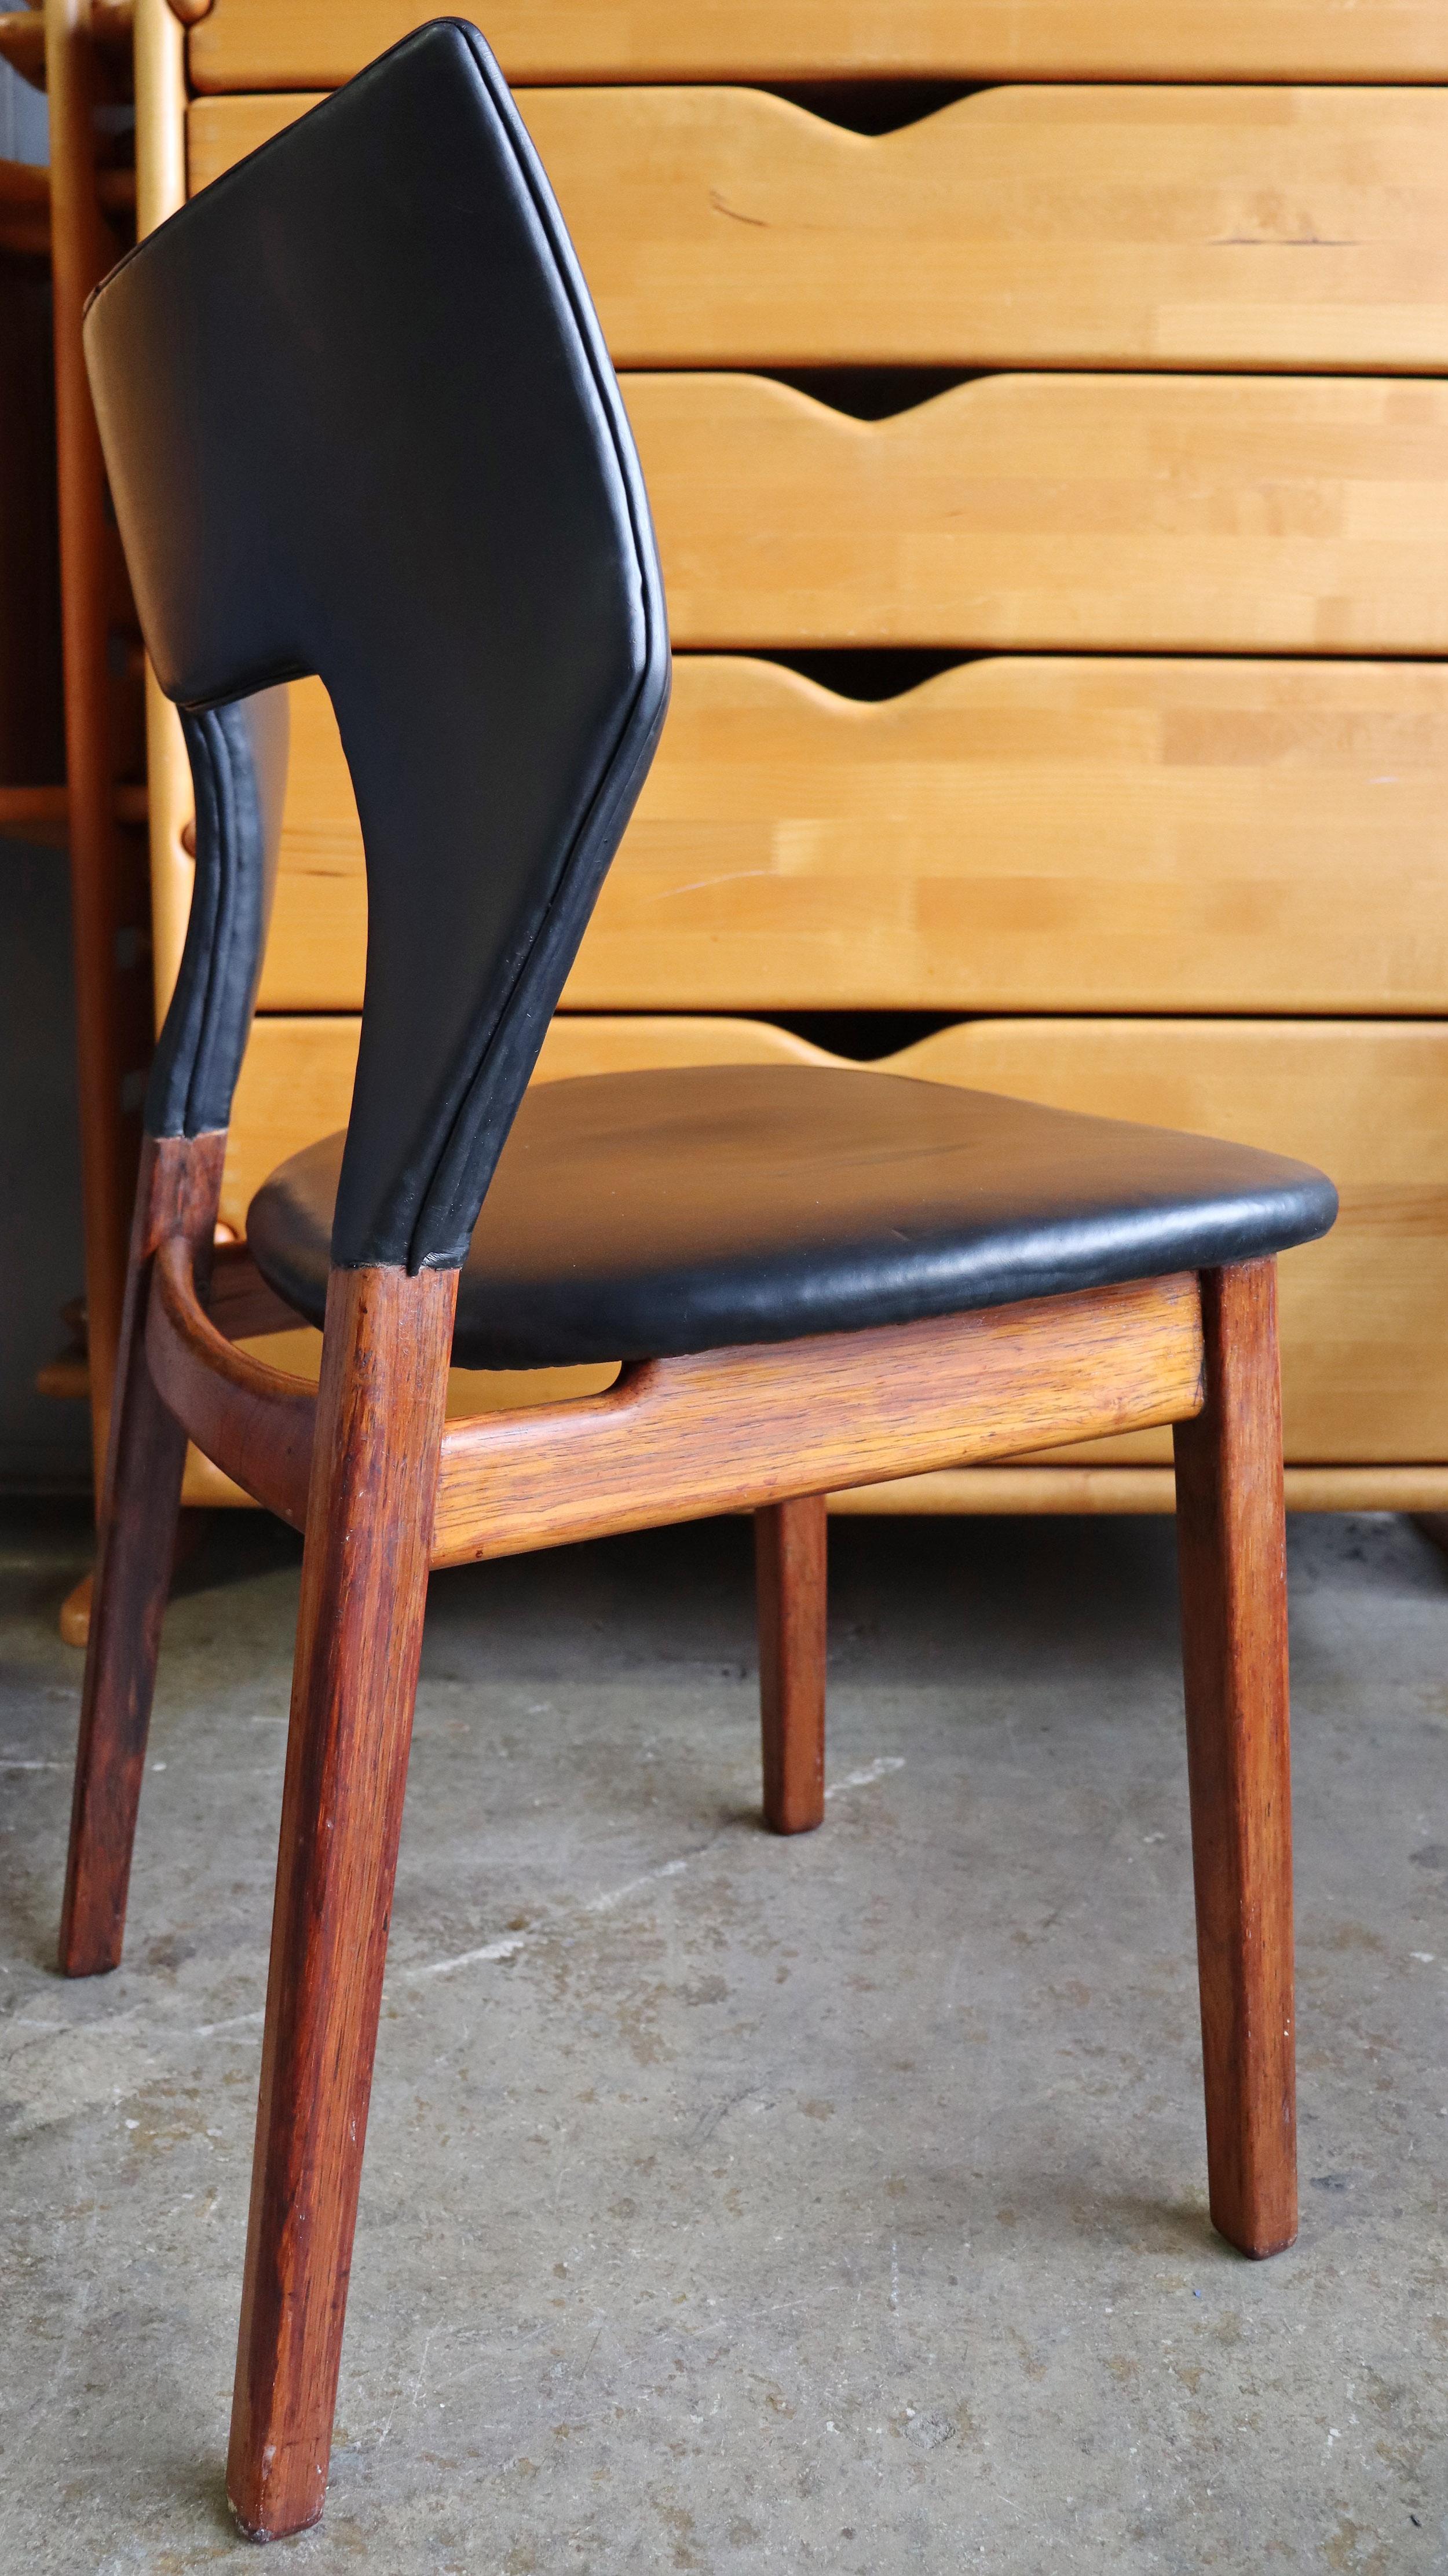 20th Century Tove & Edvard Kindt-Larsen Rosewood Chair for Thorald Madsens